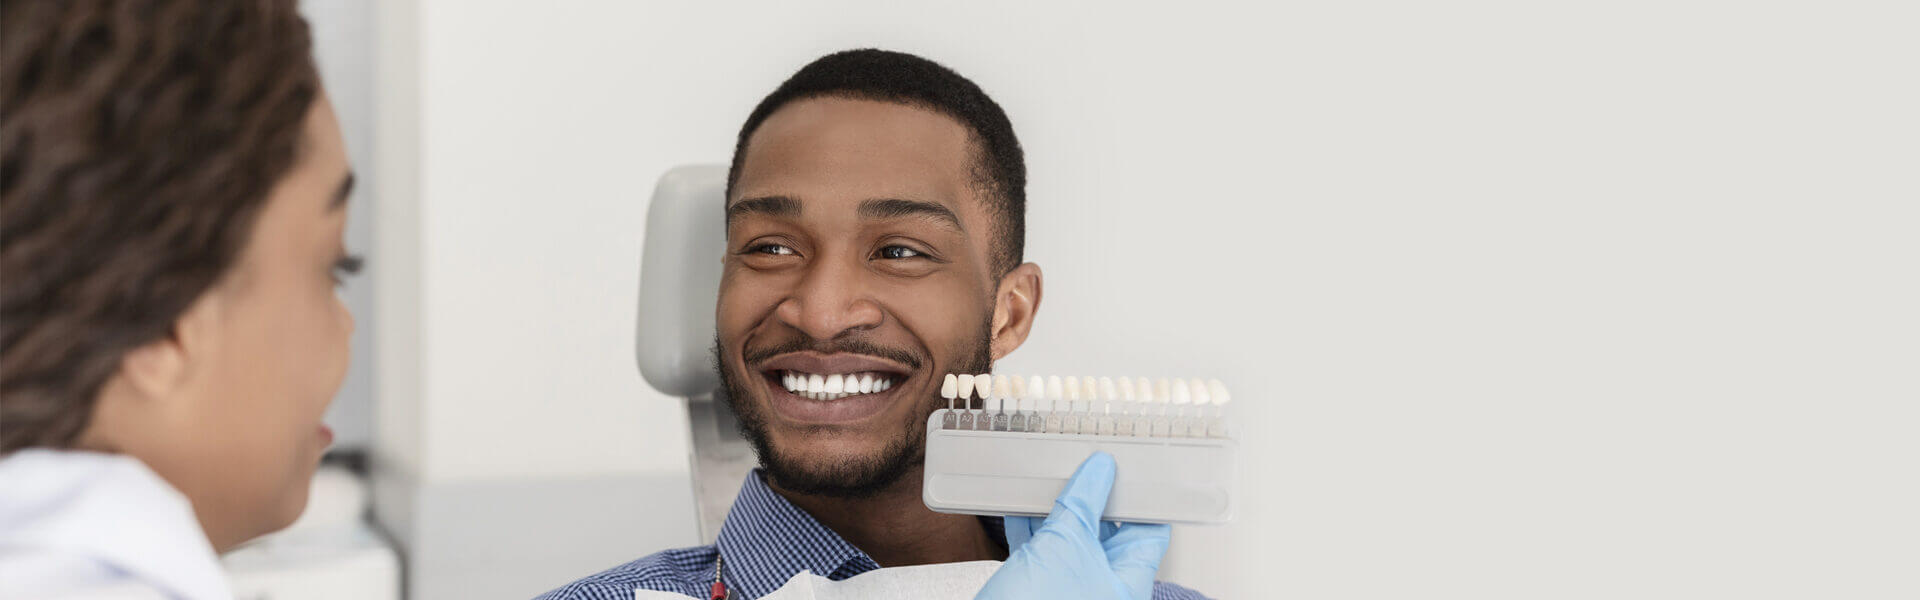 Crucial Facts You Should Know Before Getting Dental Veneers